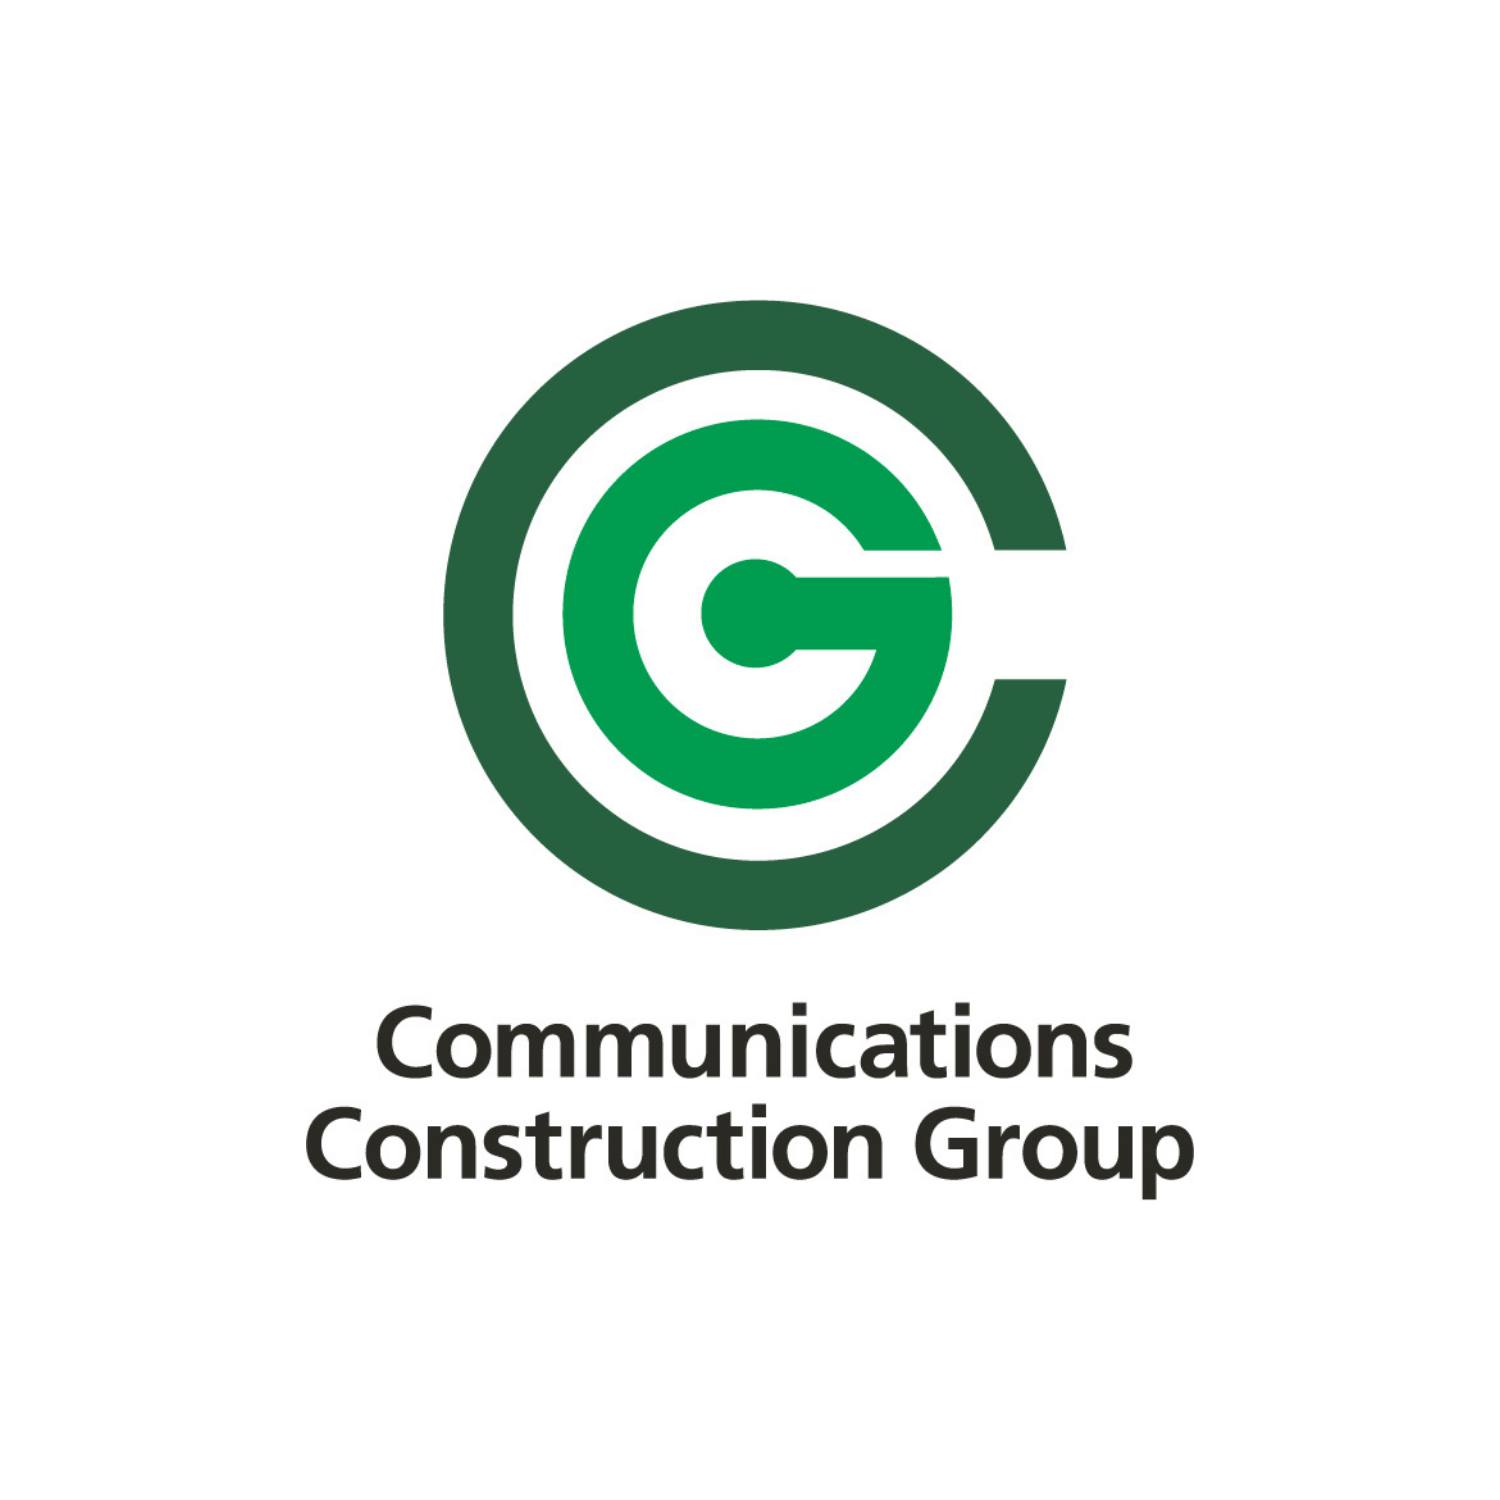 Communications Construction Group